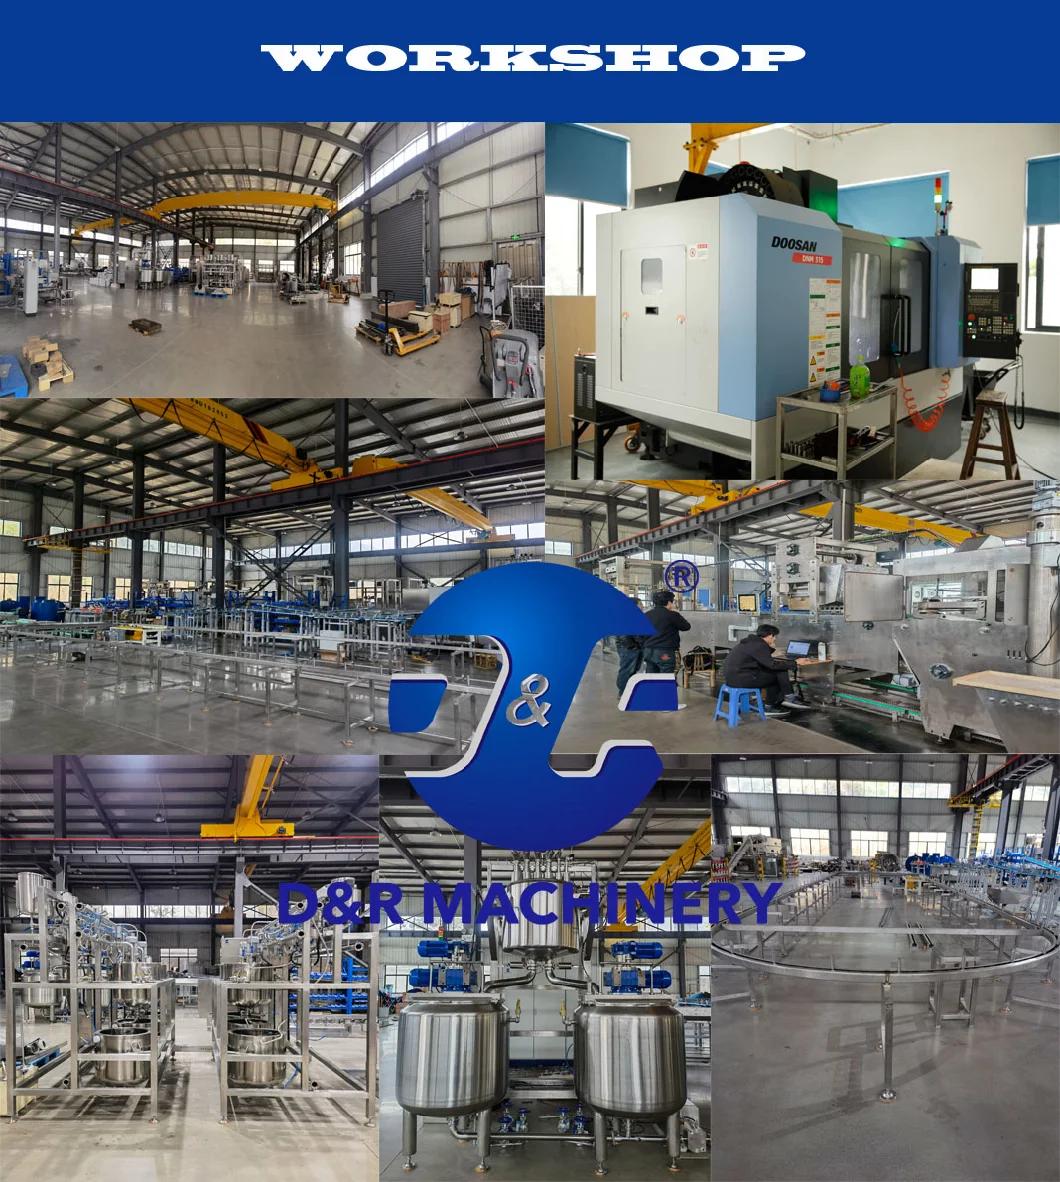 Dr-Cm-2 Chocolate Melting Machine for Shops